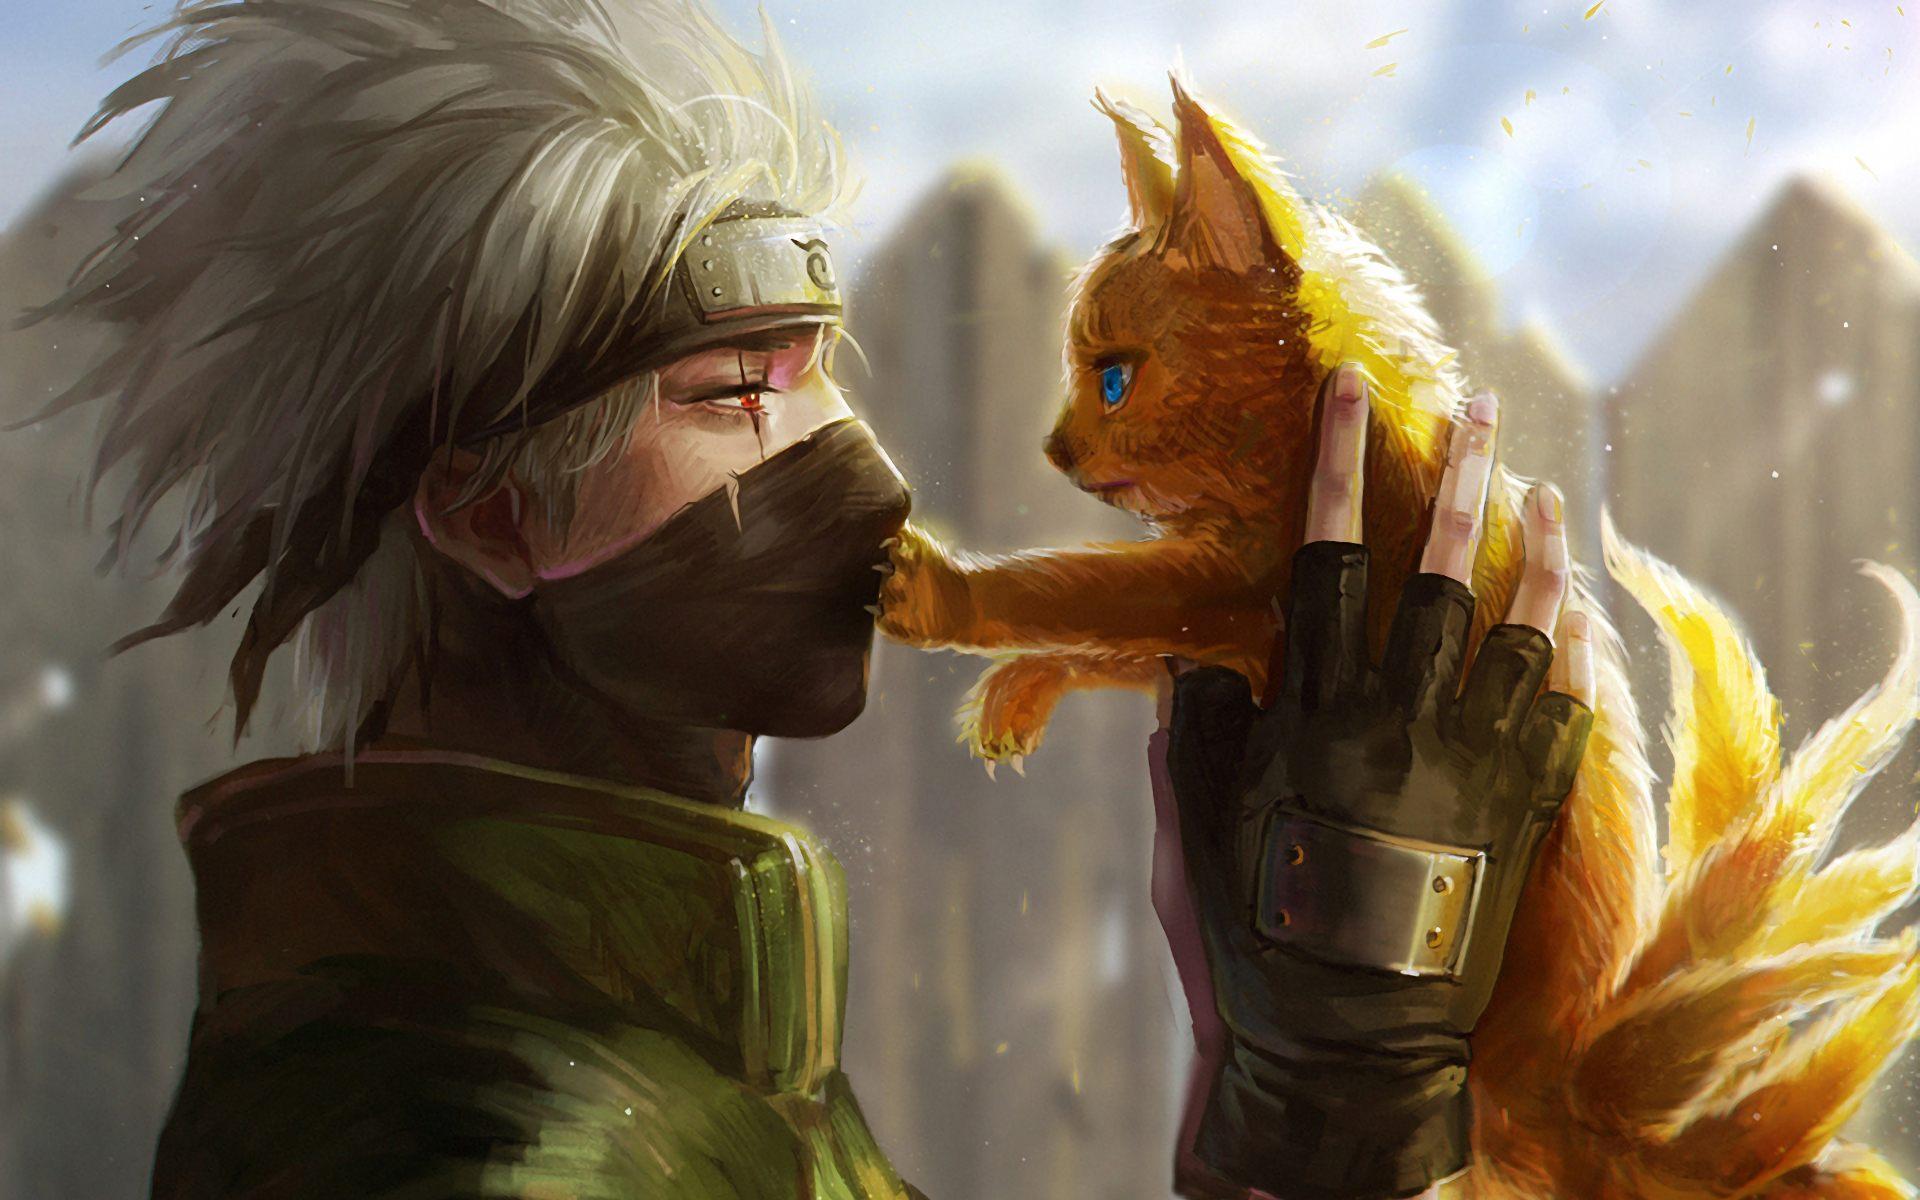 Download Naruto Anime Boy and Cat Wallpaper for desktop, mobile